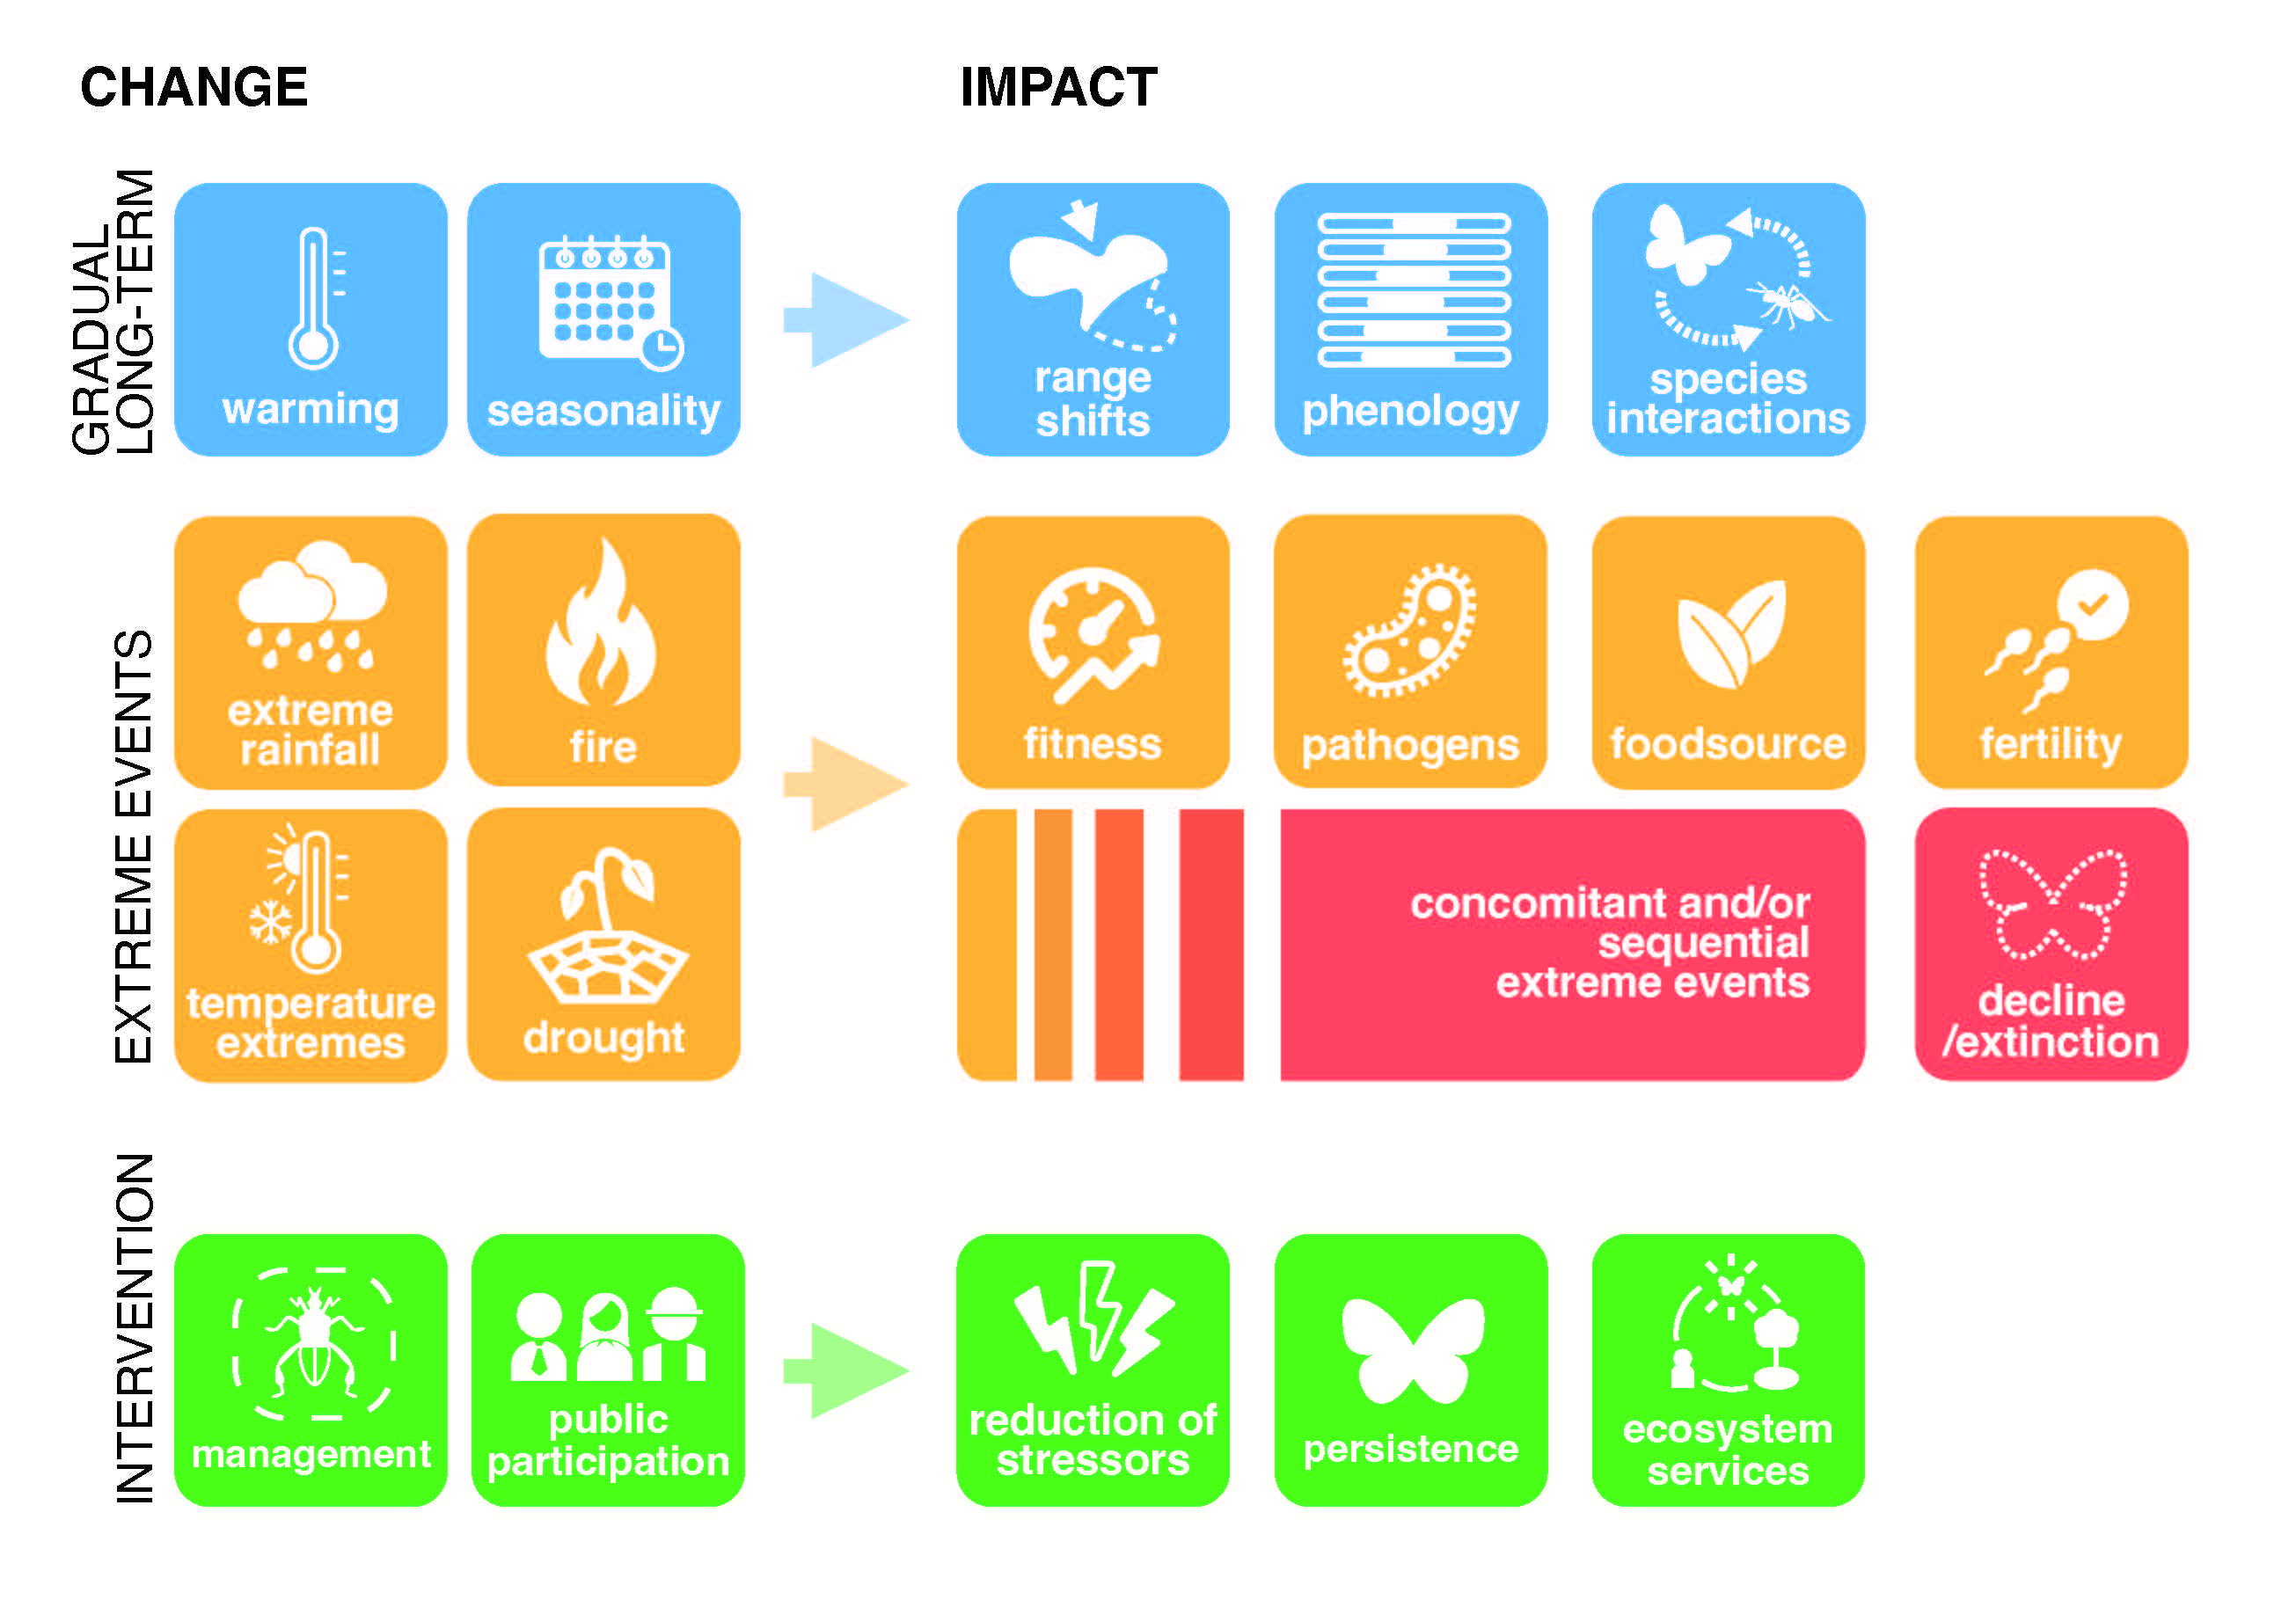 A chart outlines the changes to insect communities and their various impacts. For instance, gradual, long-term changes in warming and seasonality can lead to range shifts and impacts to phenology and species interactions.